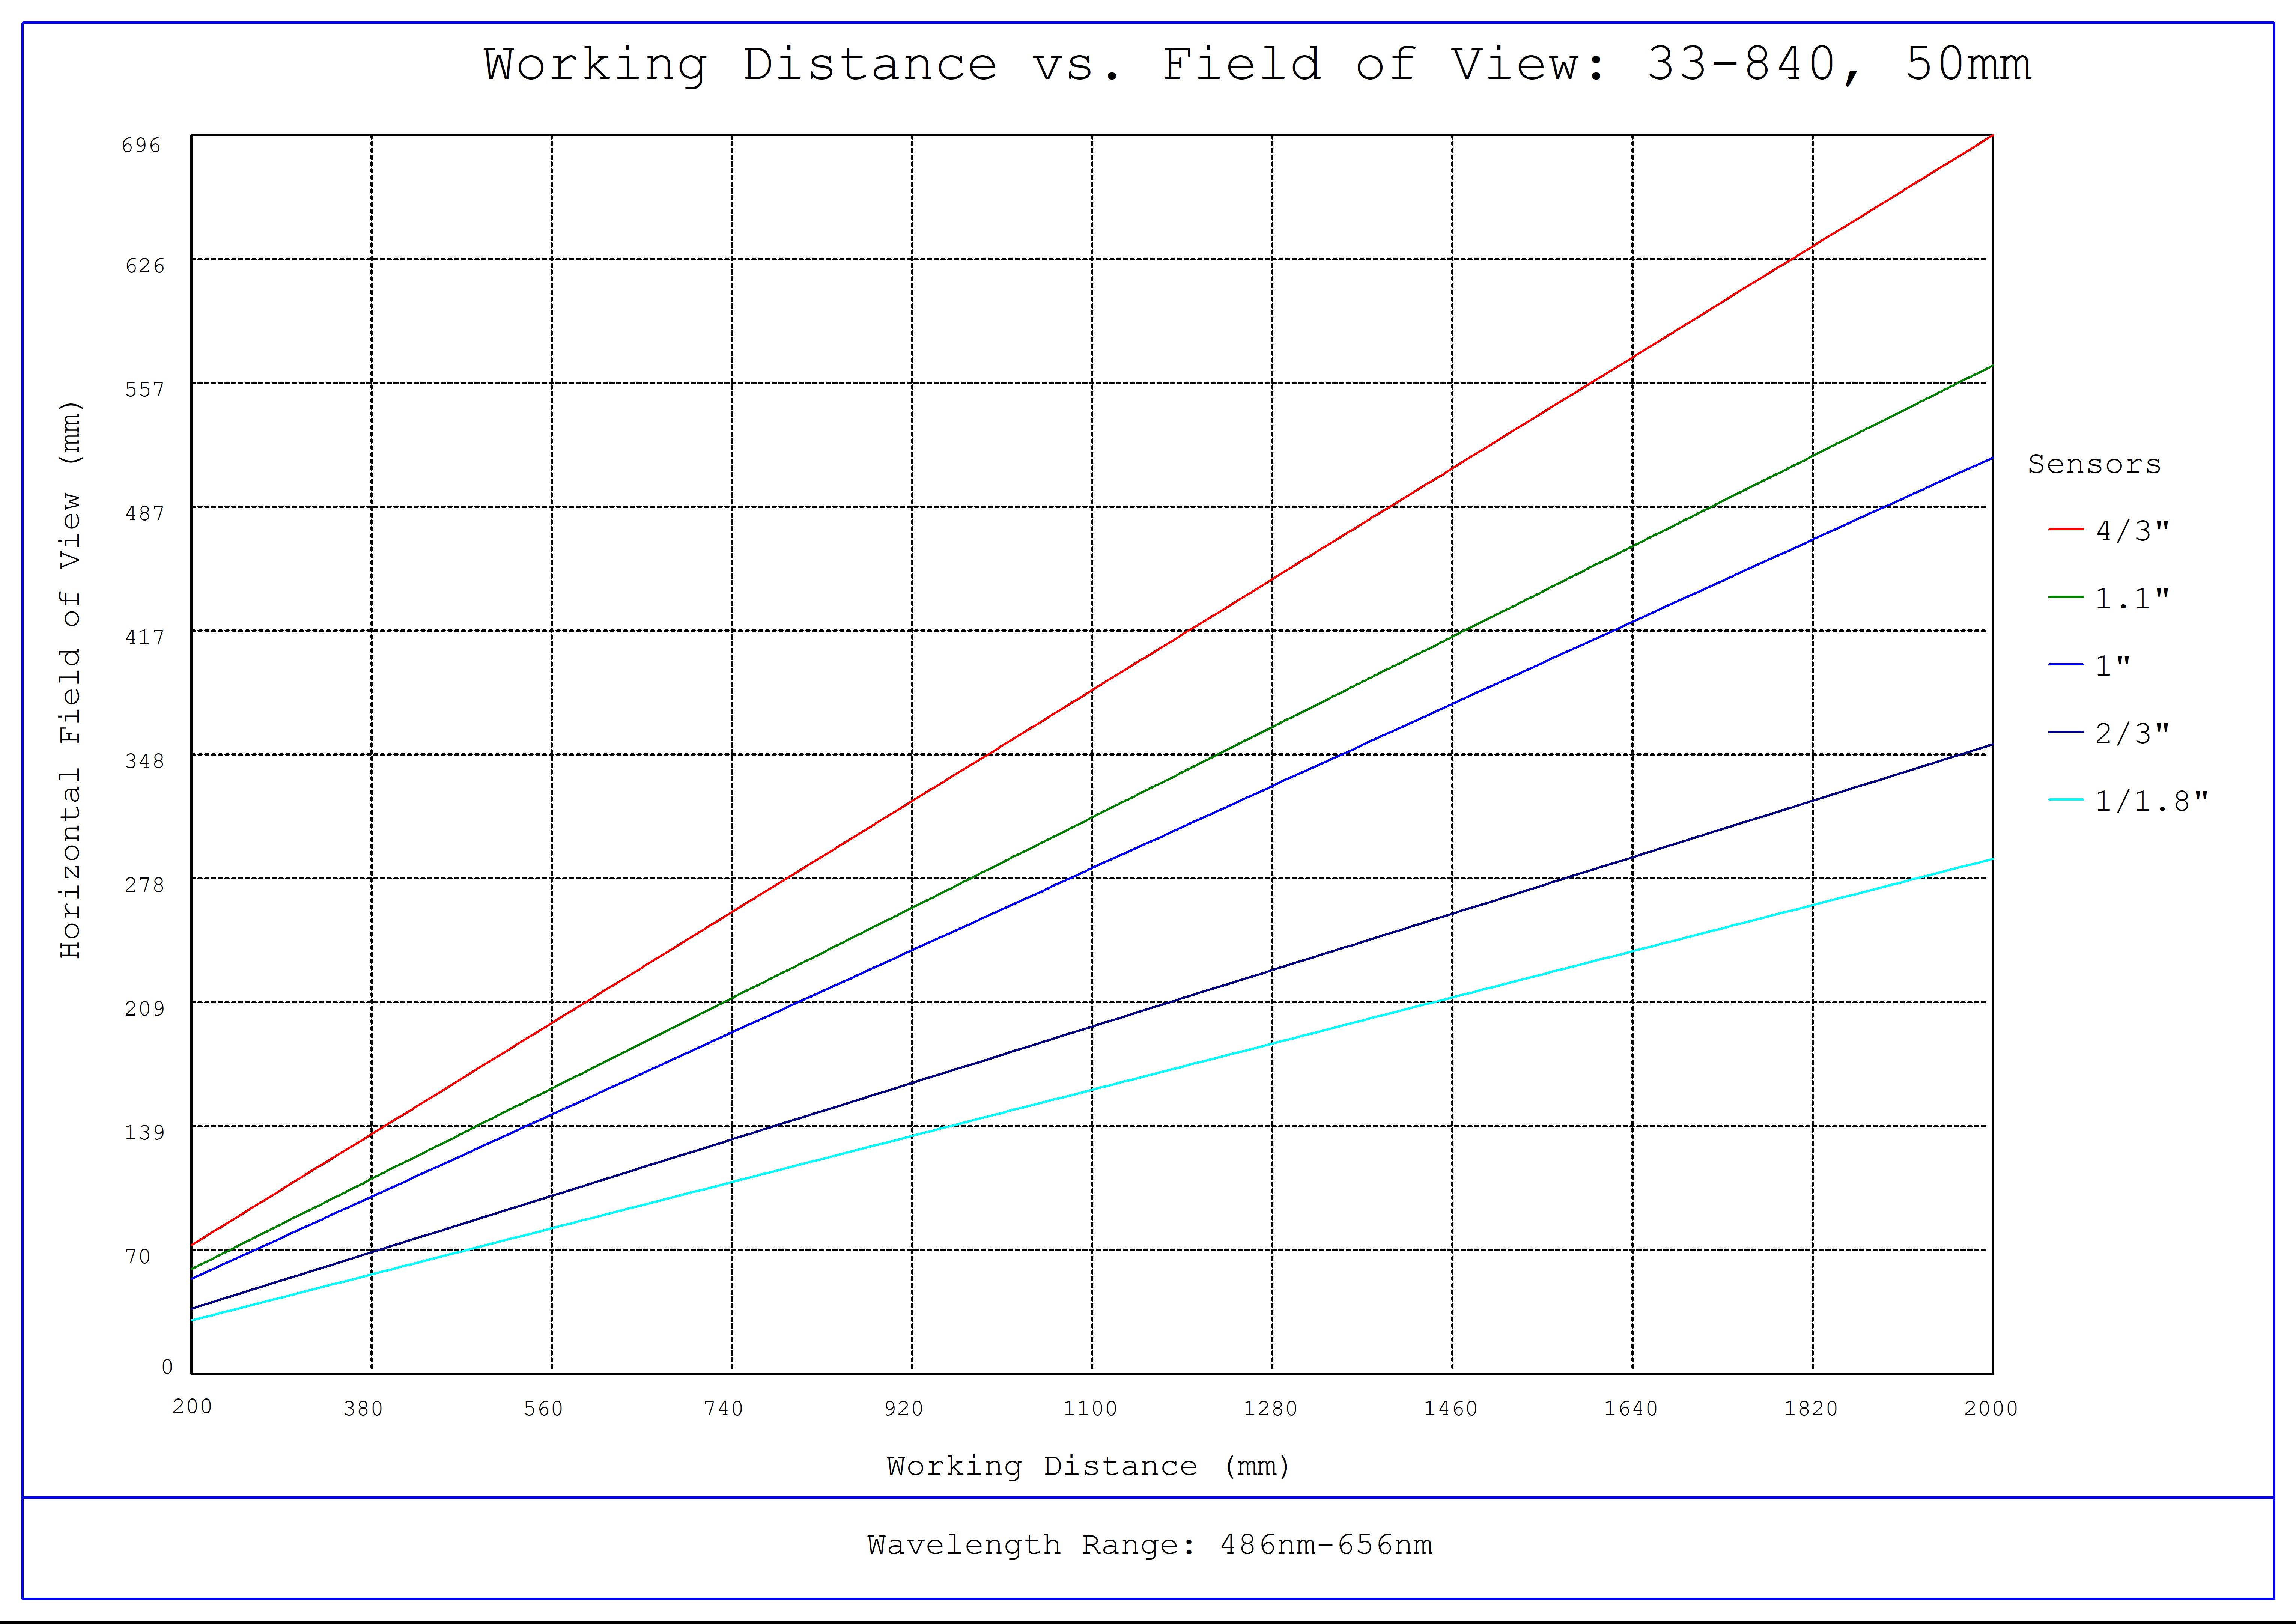 #33-840, 50mm f/11, HPi Series Fixed Focal Length Lens, Working Distance versus Field of View Plot